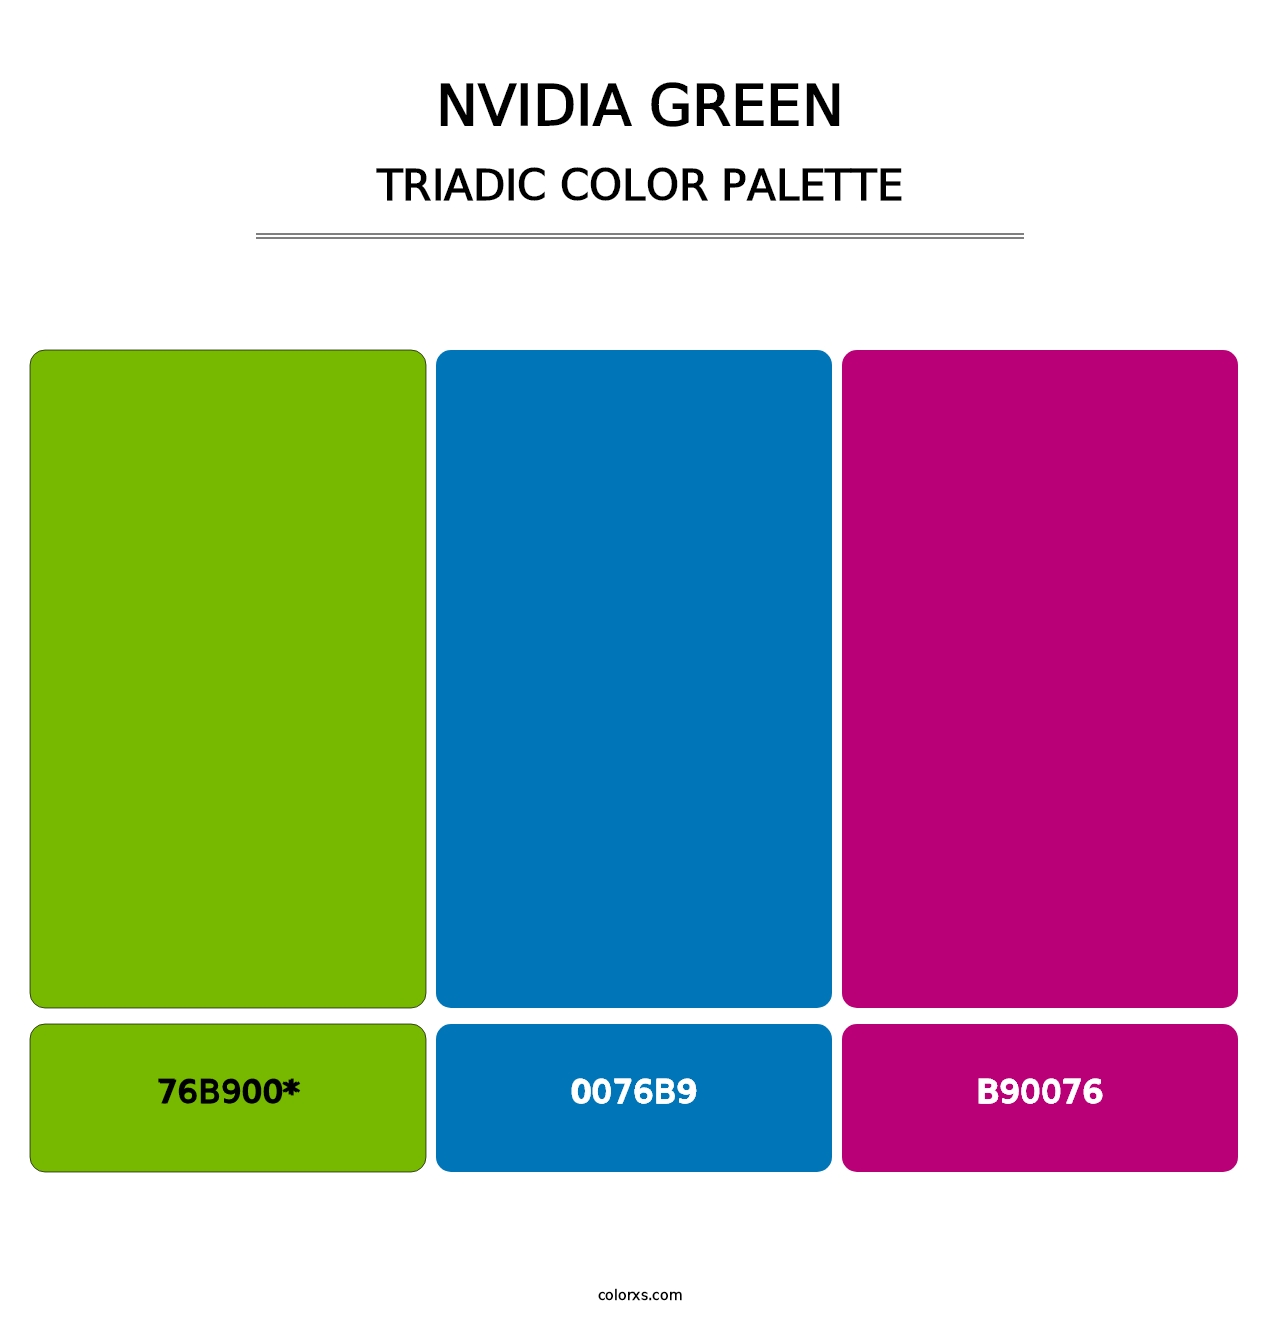 Nvidia Green - Triadic Color Palette